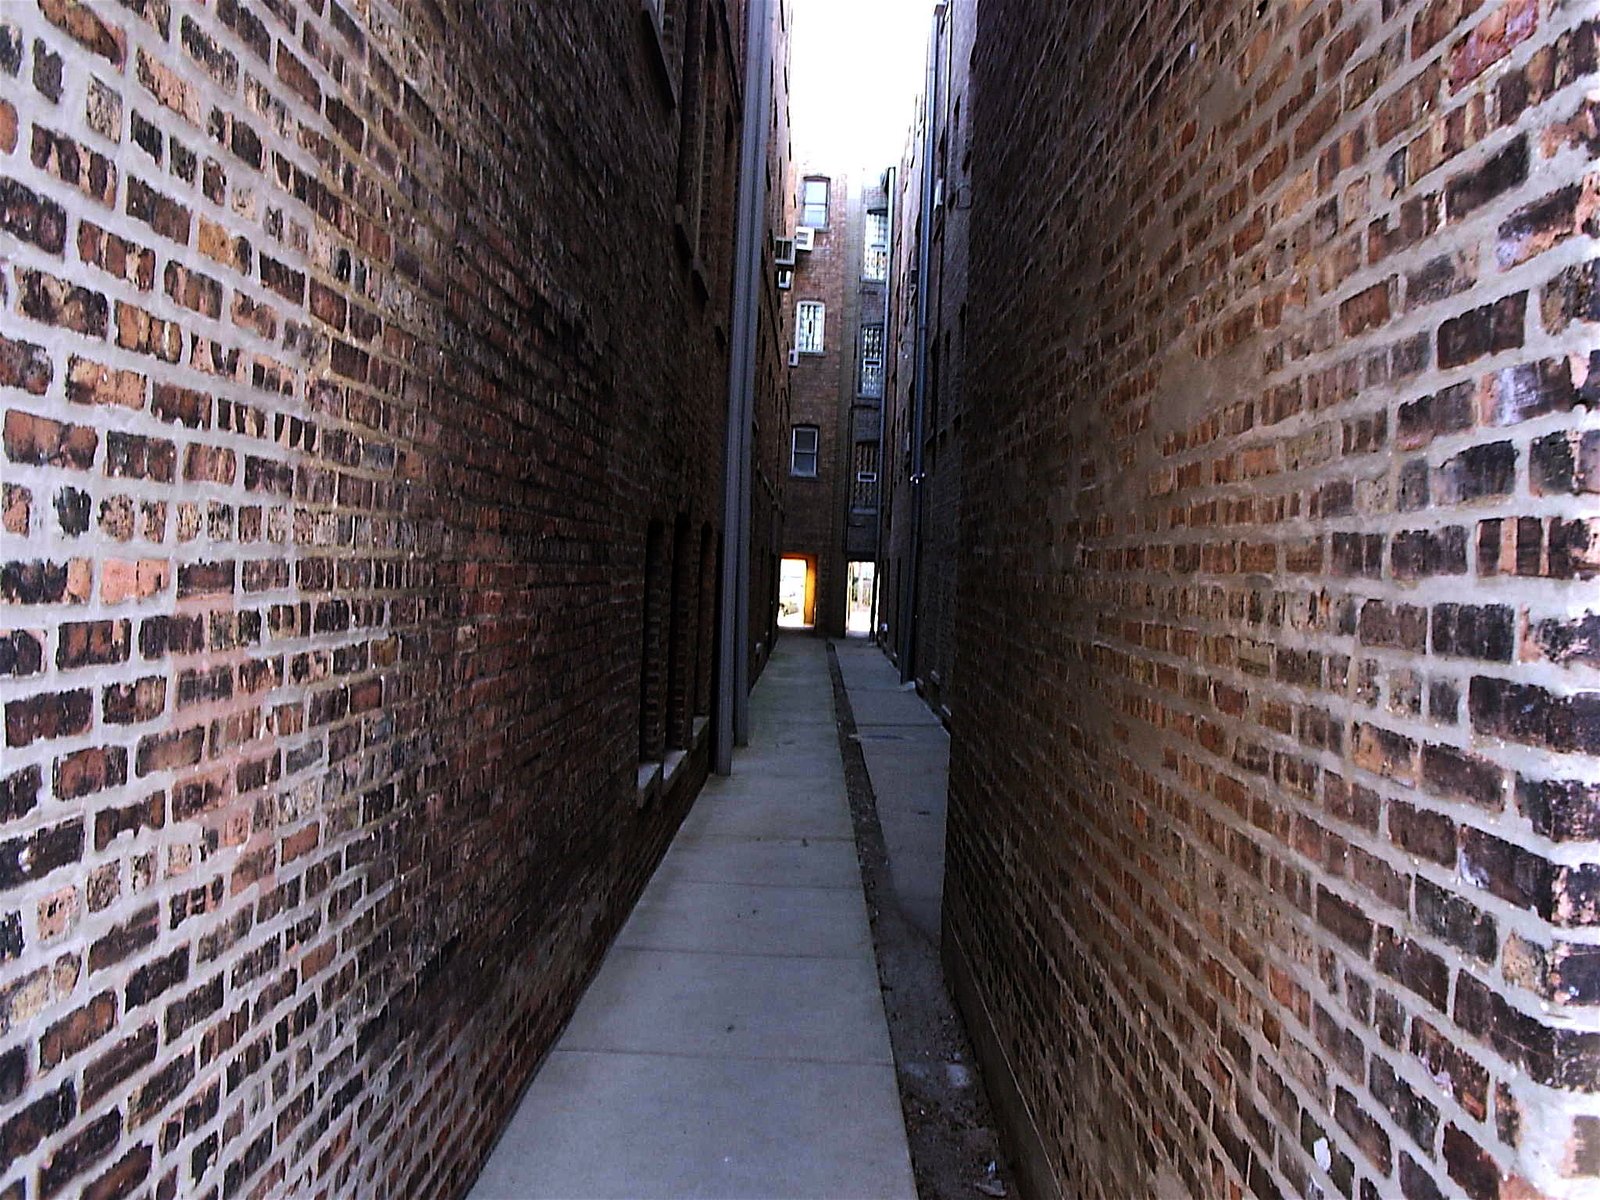 the narrow alley between two buildings has a fire hydrant